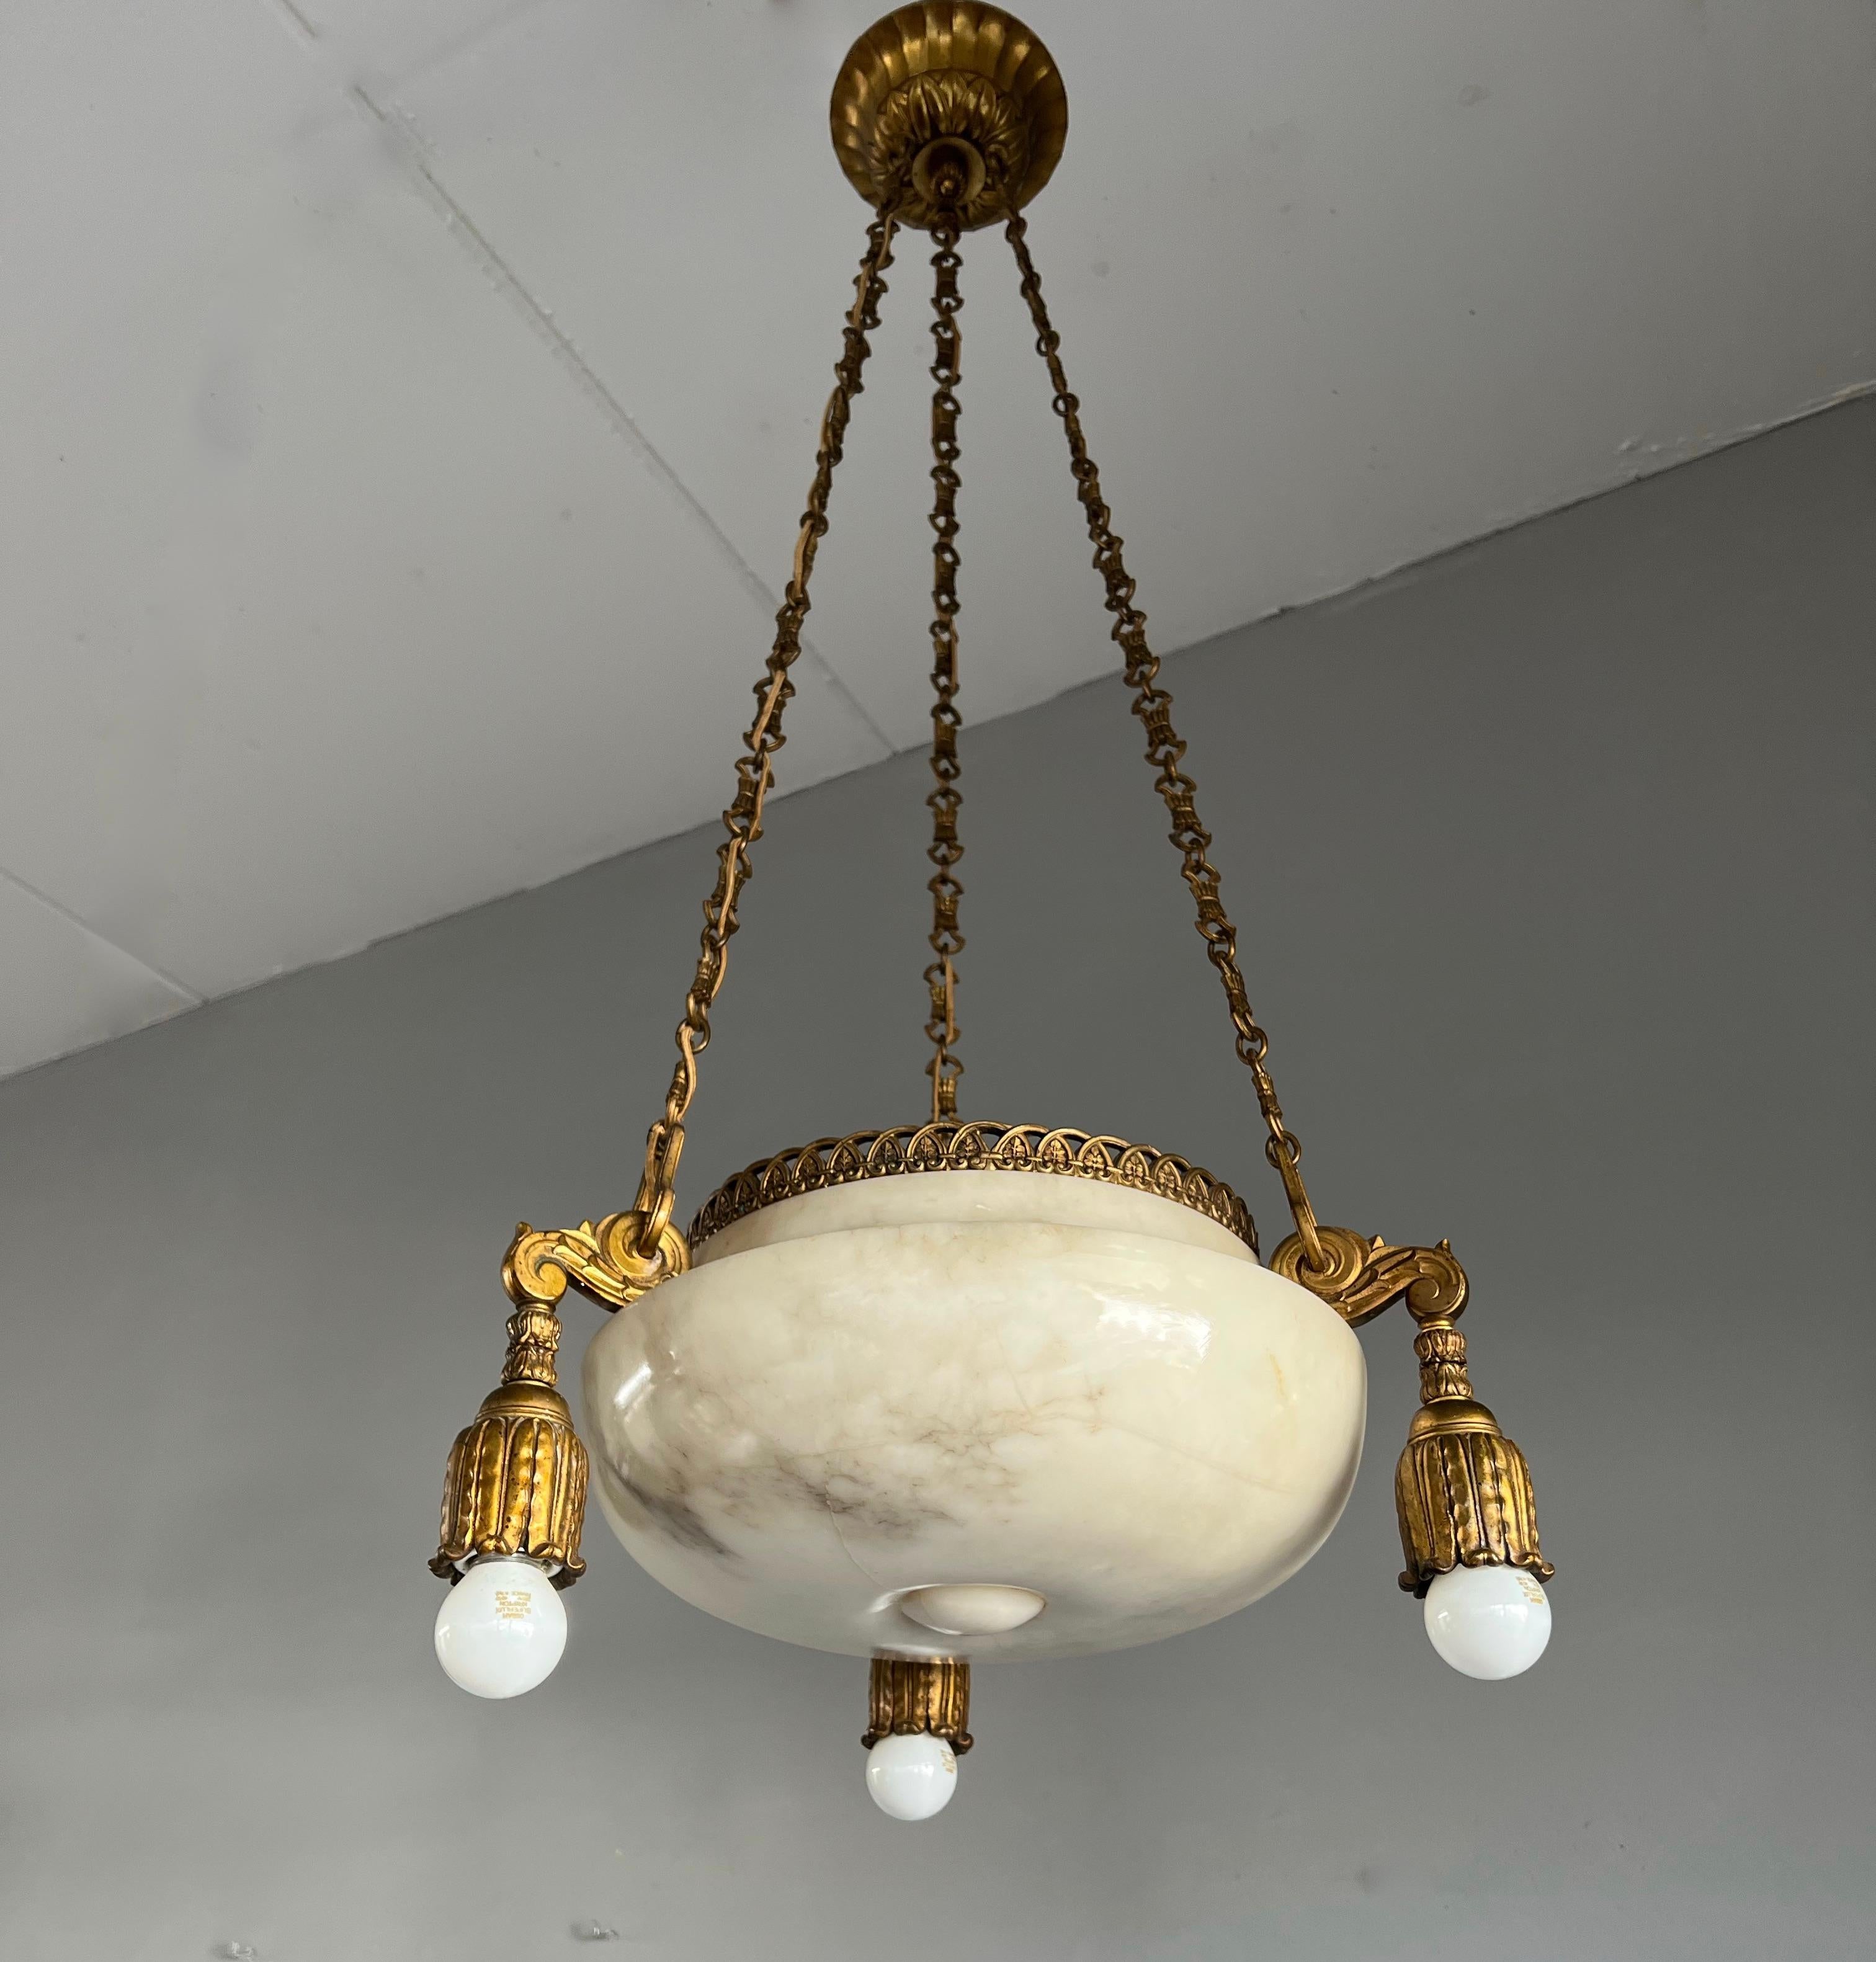 Antique French, four light pendant.

This stunning and highly stylish chandelier originates from early twentieth century France and to have found it in this good condition again felt like a blessing. The stylish design alabaster bowl is as strong